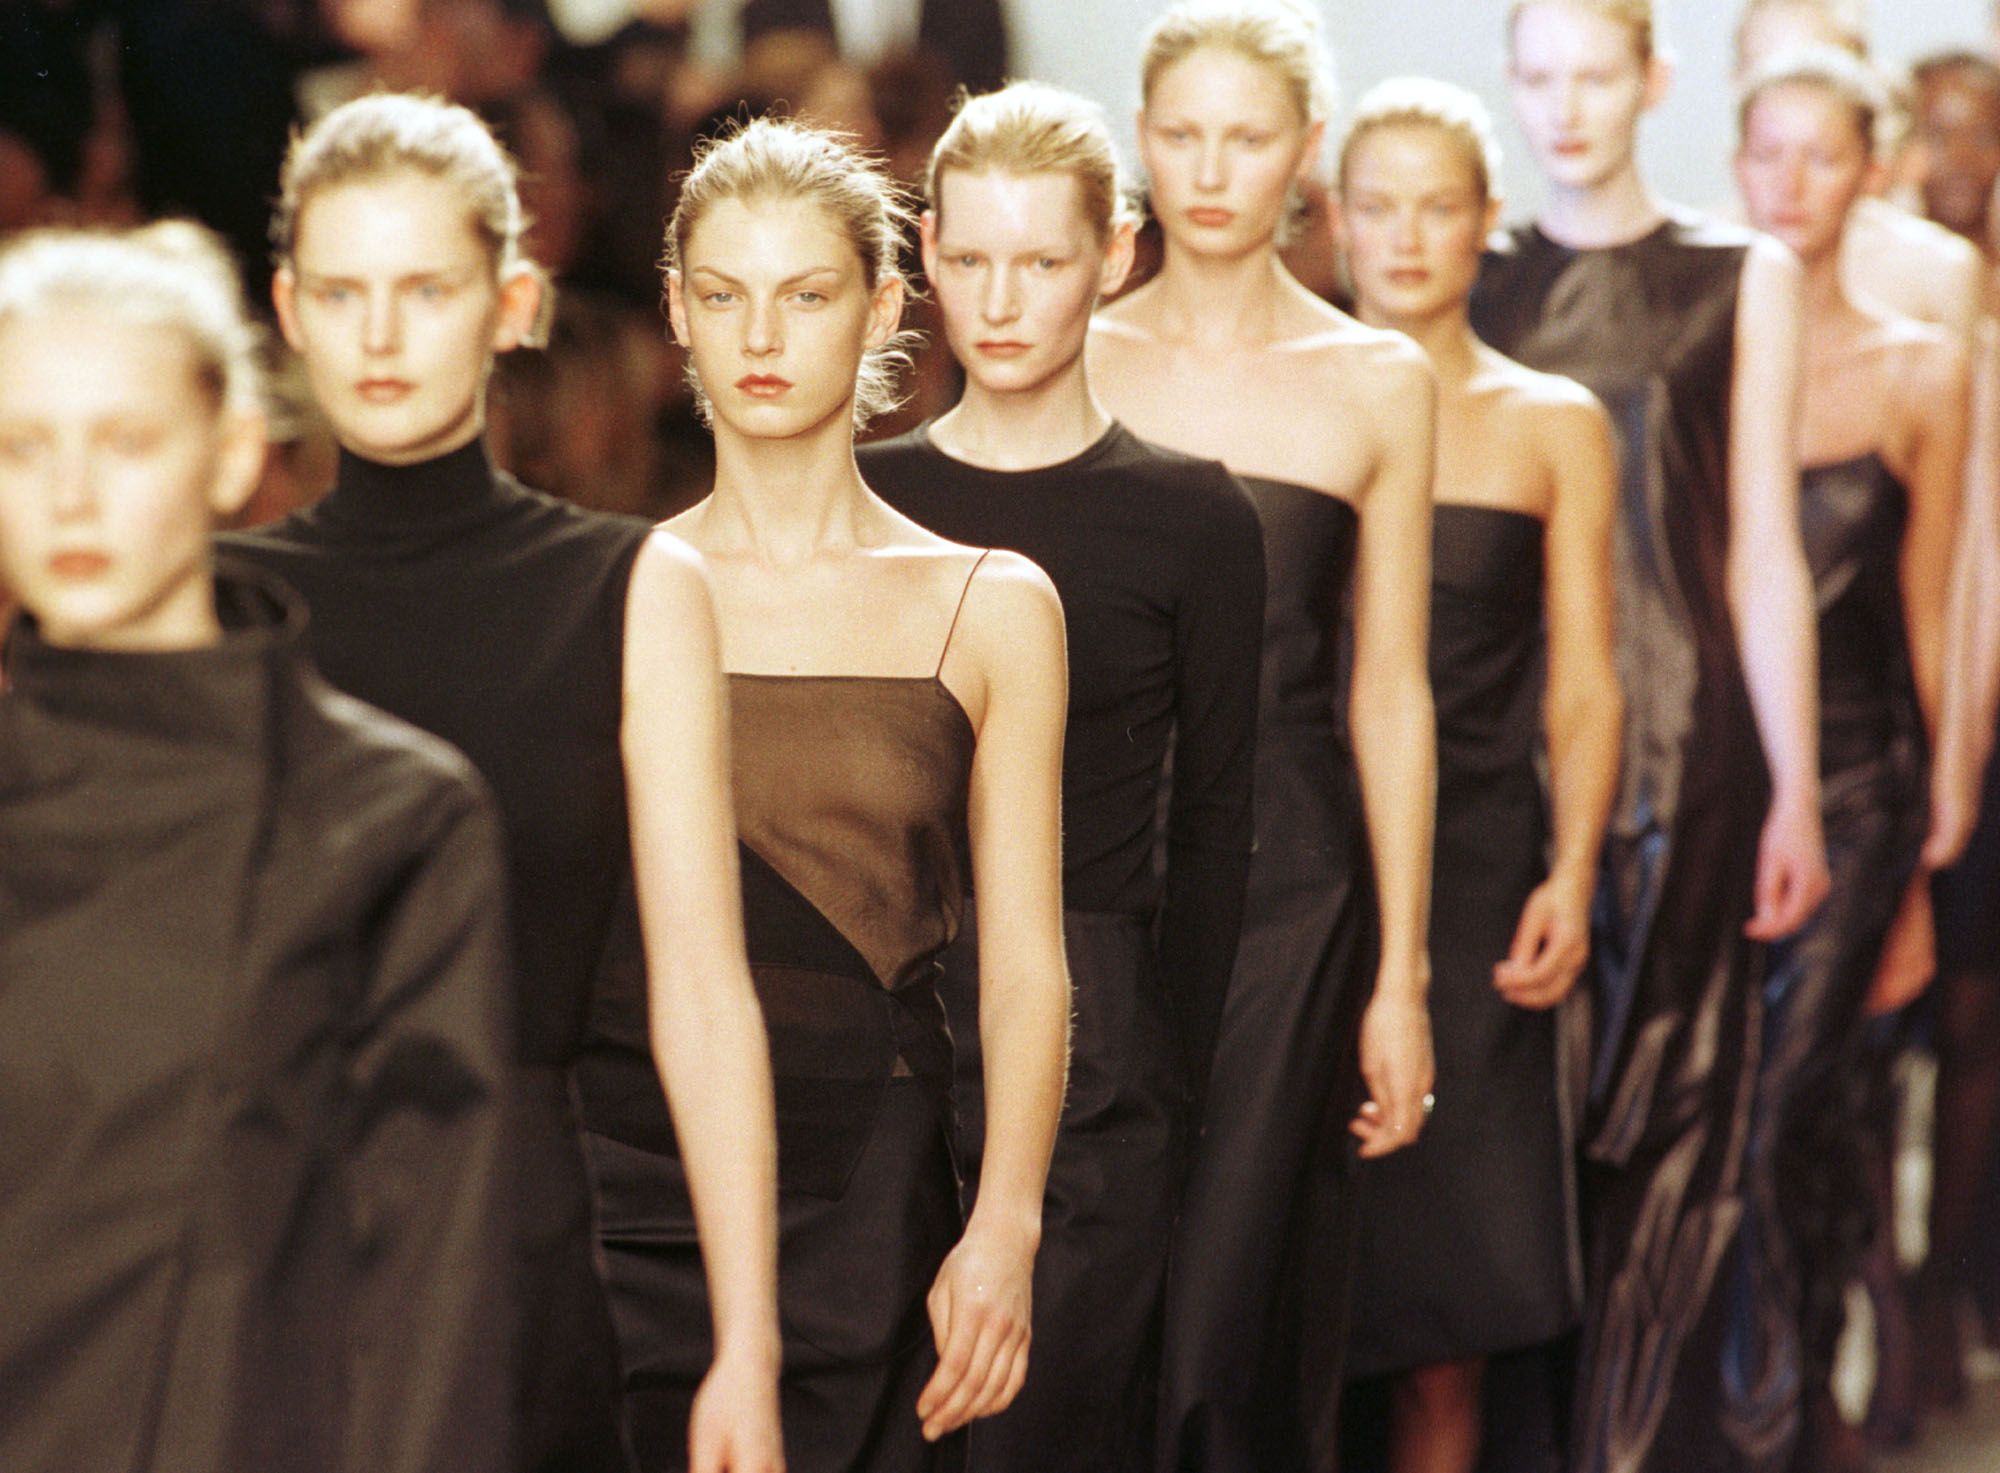 The fascinating history of the catwalk show